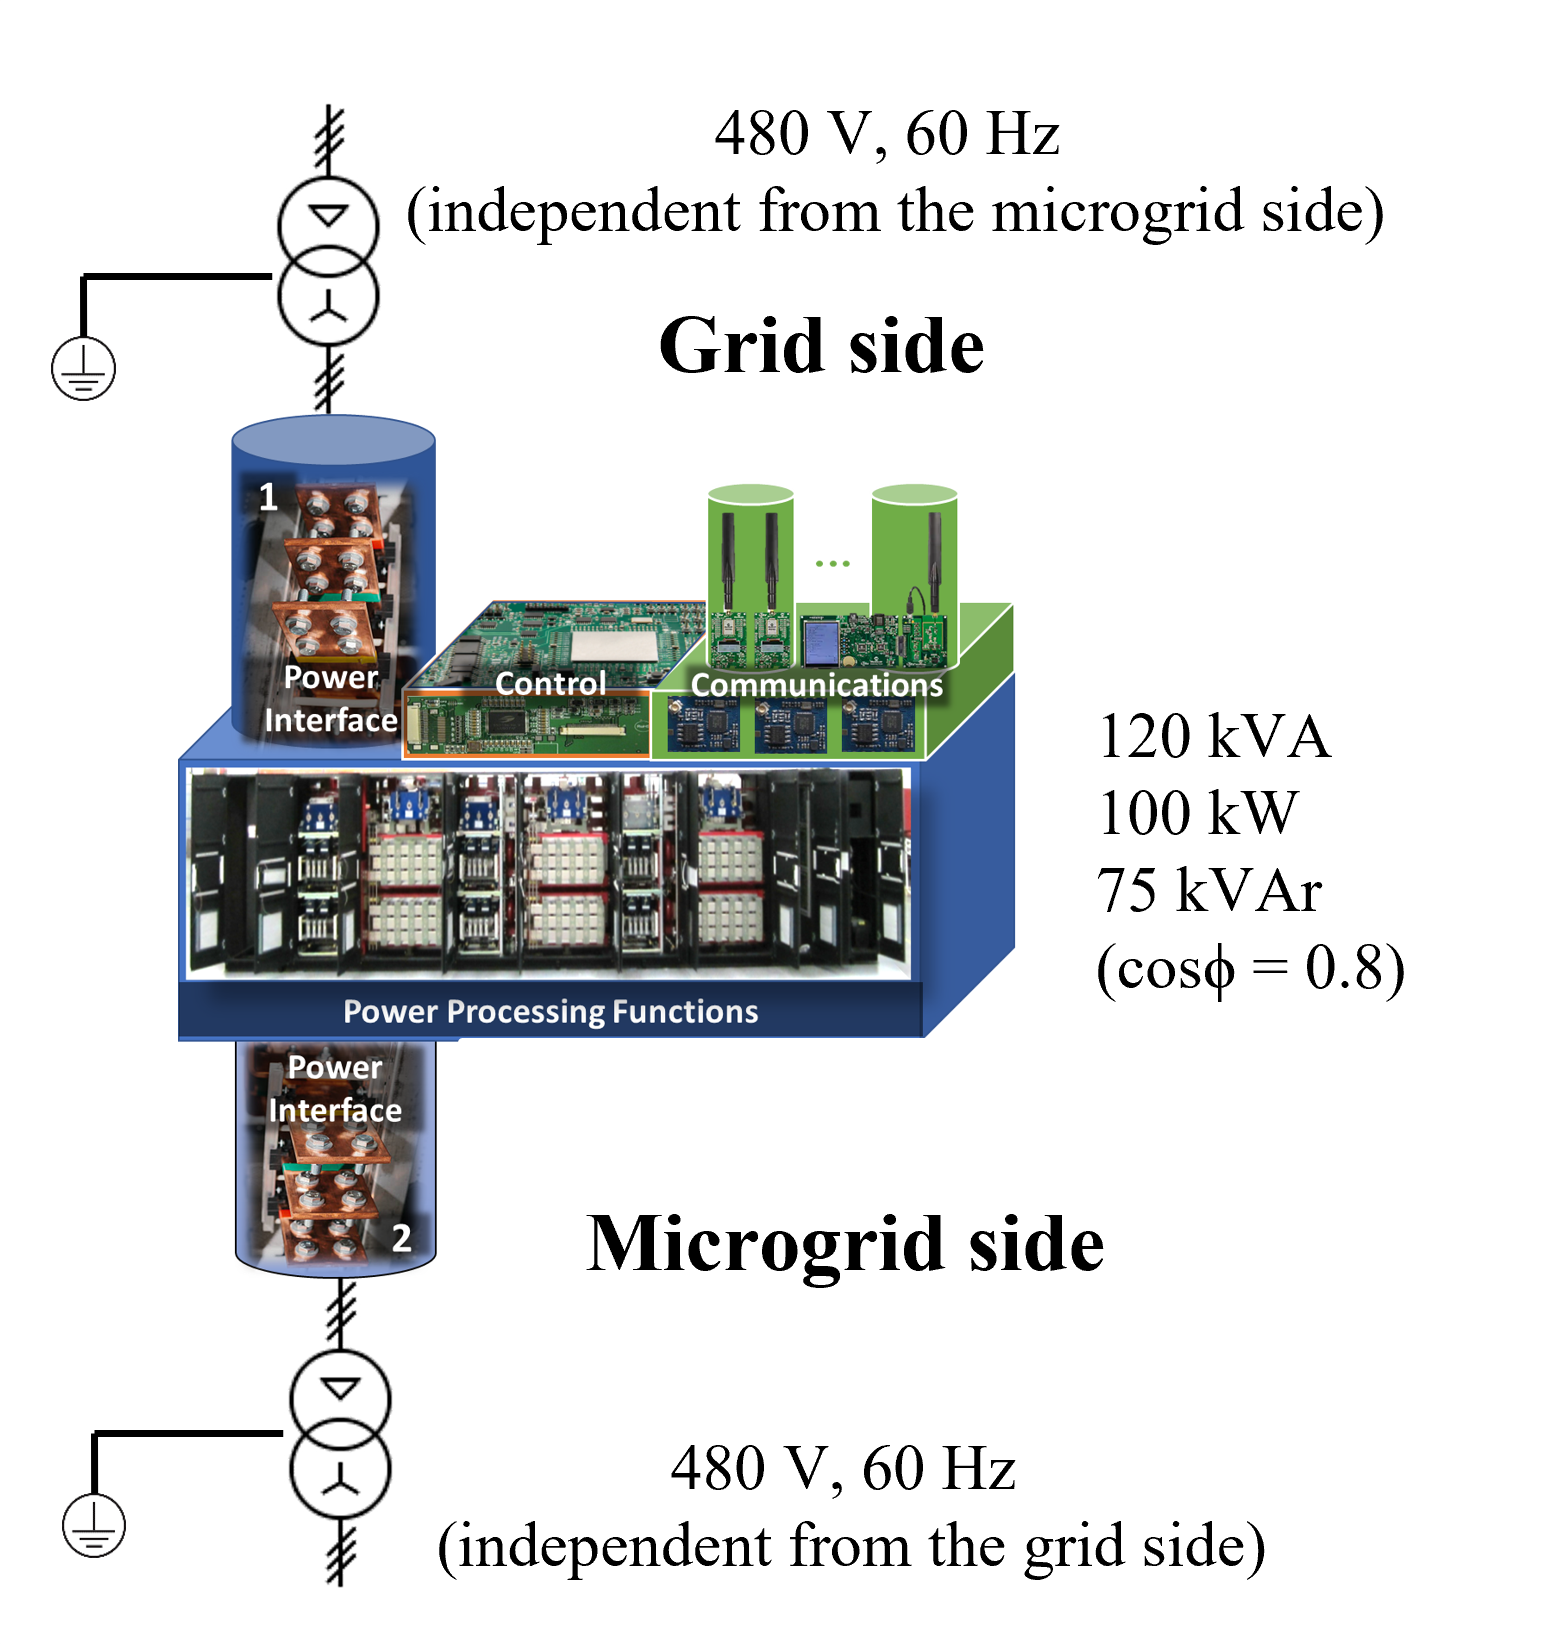 Grid side and Microgrid side